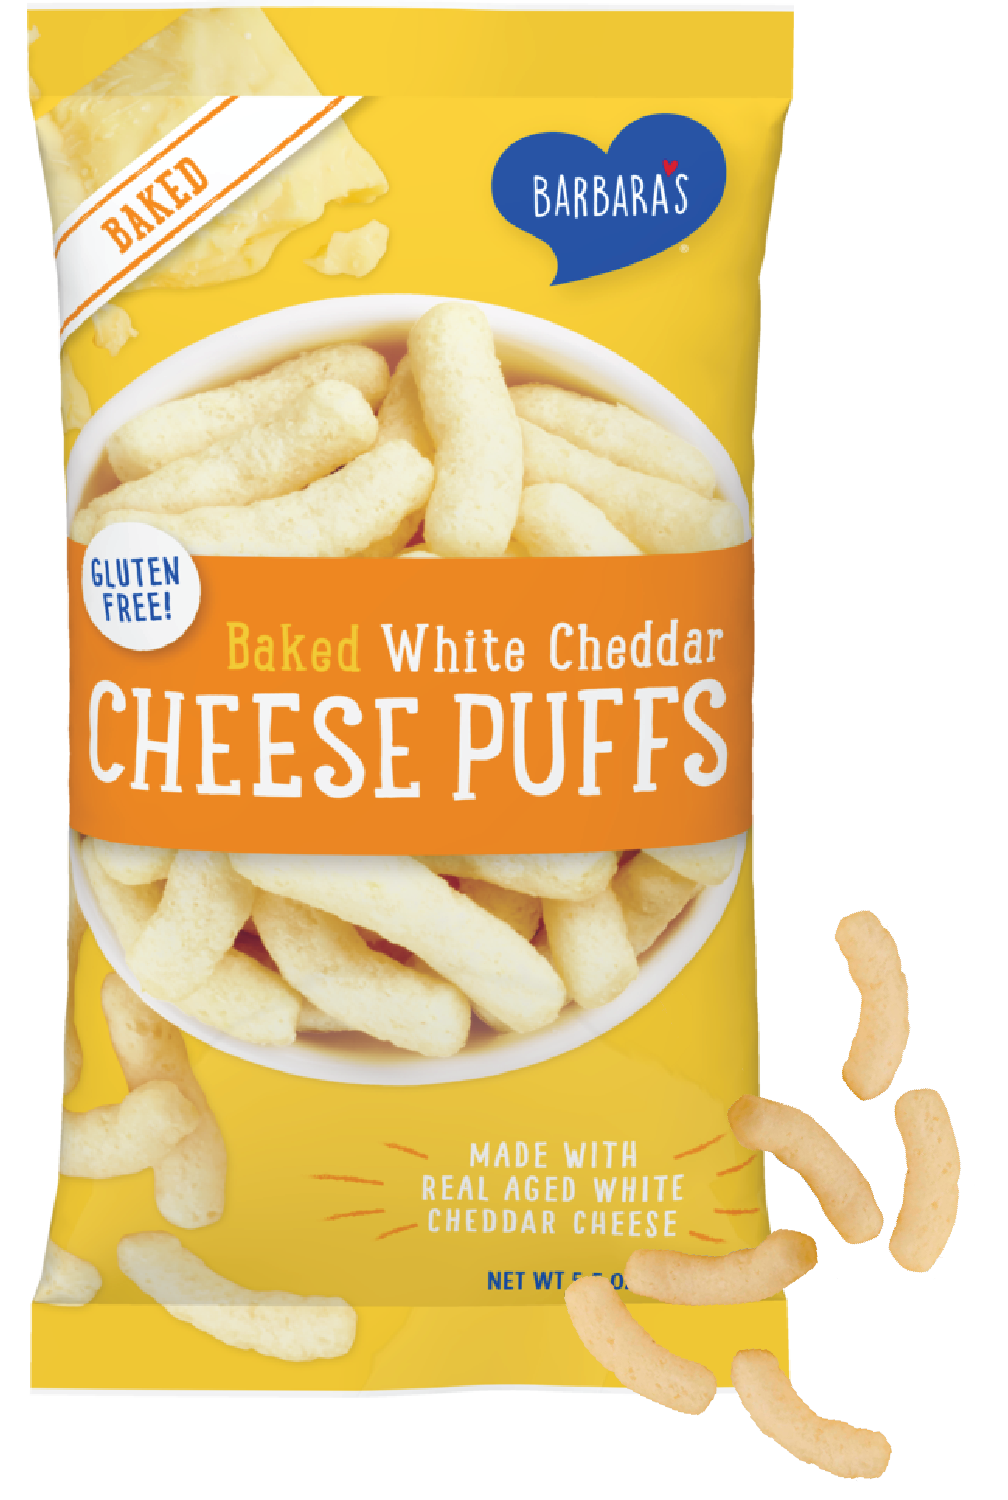 fout Ontspannend Arthur Barbara's Baked White Cheddar Cheese Puffs - Barbara's - Breakfast Cereal,  Snacks, Recipes